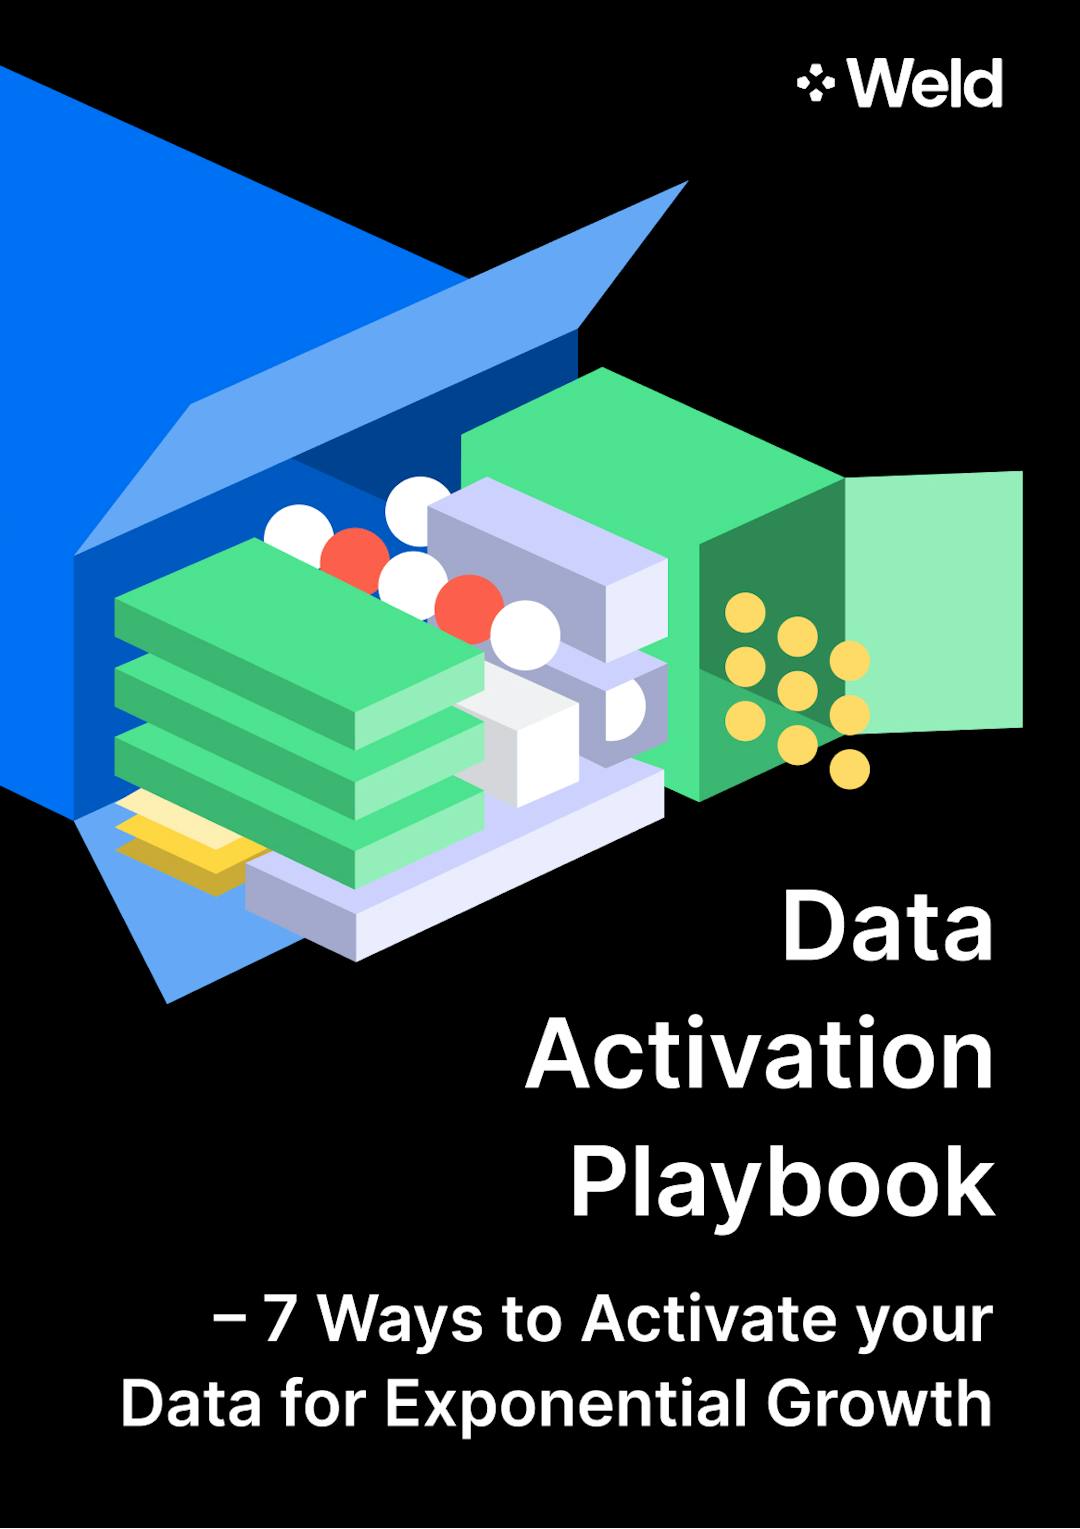 The Data Activation Playbook – 7 Ways to Activate your Data for Exponential Growth cover image